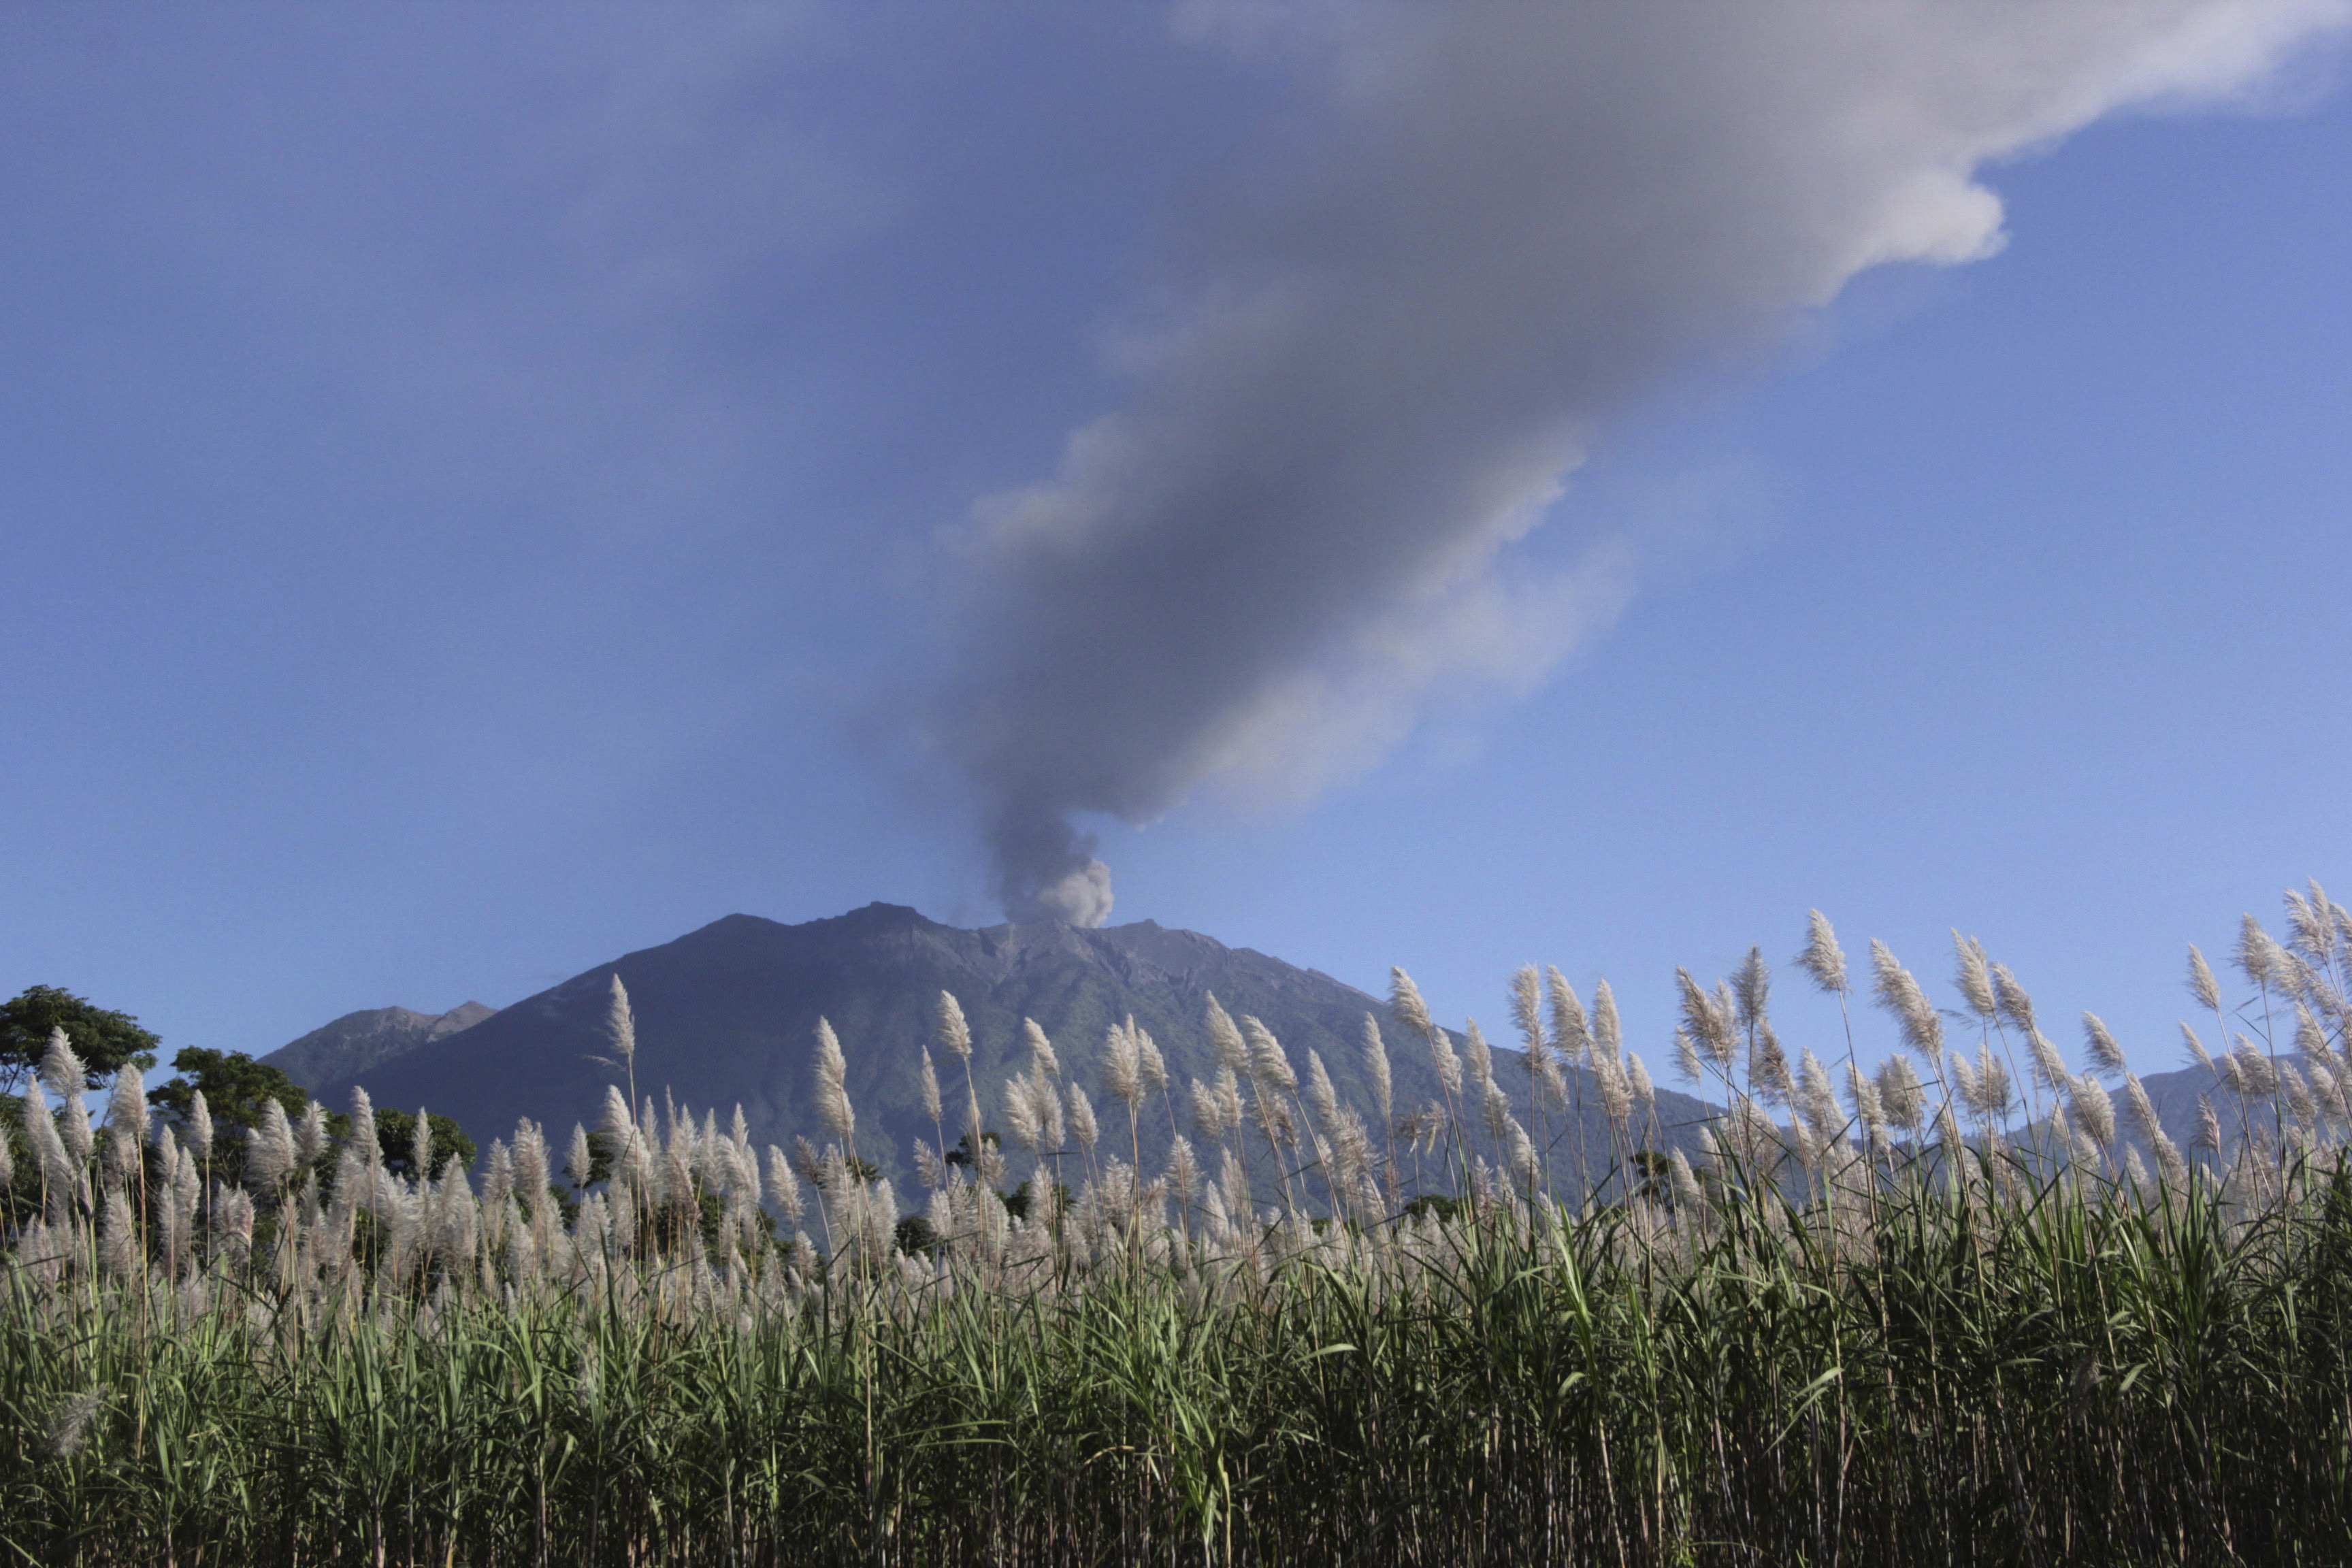 Ash and smoke are emitted from the volcano Mount Raung seen from the village of Sumber Arum, near Banyuwangi, East Java province,  Indonesia on July 4, 2015.